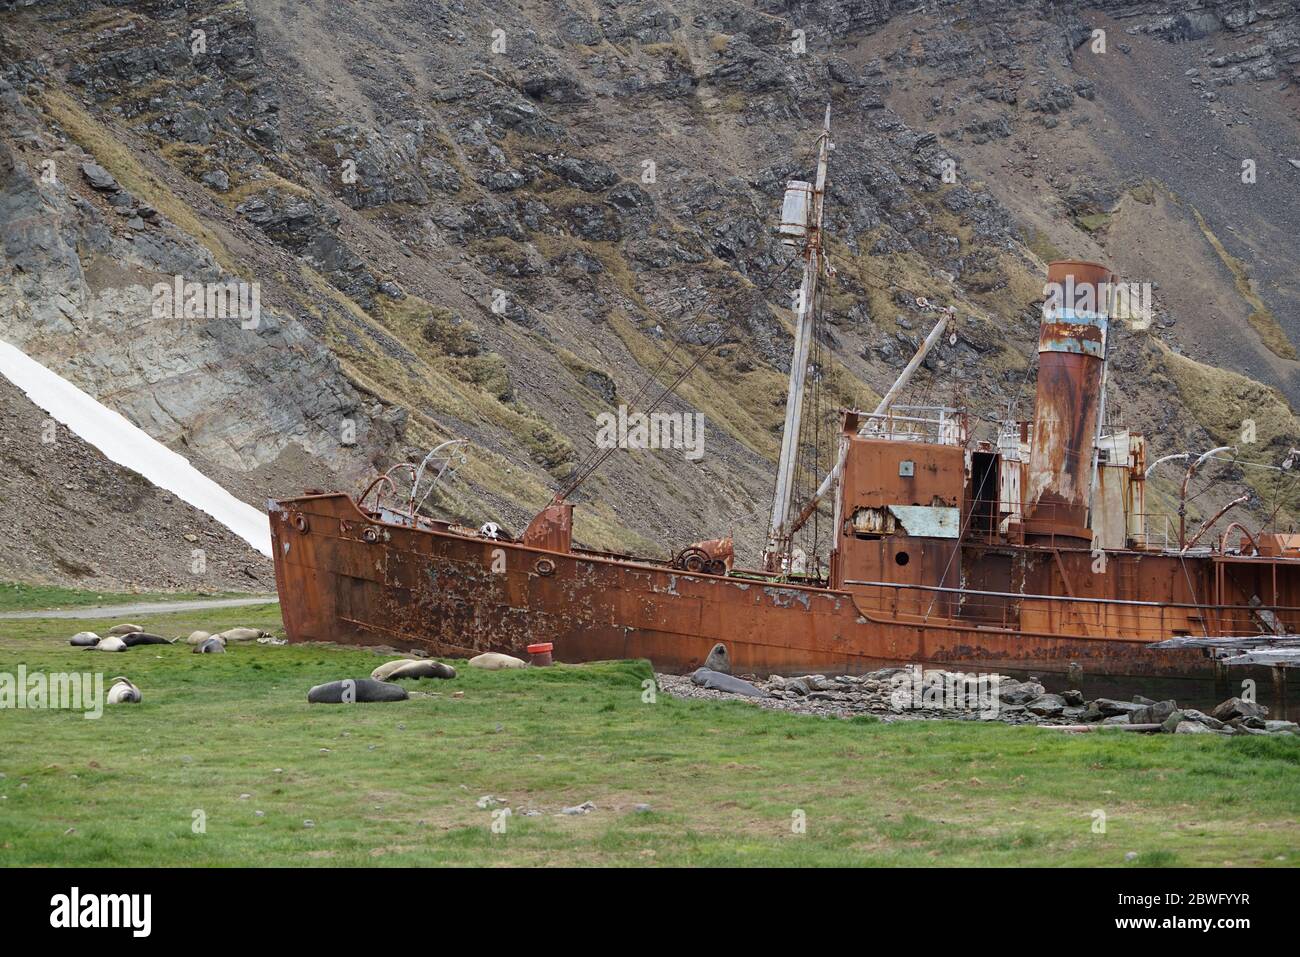 Rusty shipwreck of a whaling ship called 'Petrel' on South Georgia. Stock Photo